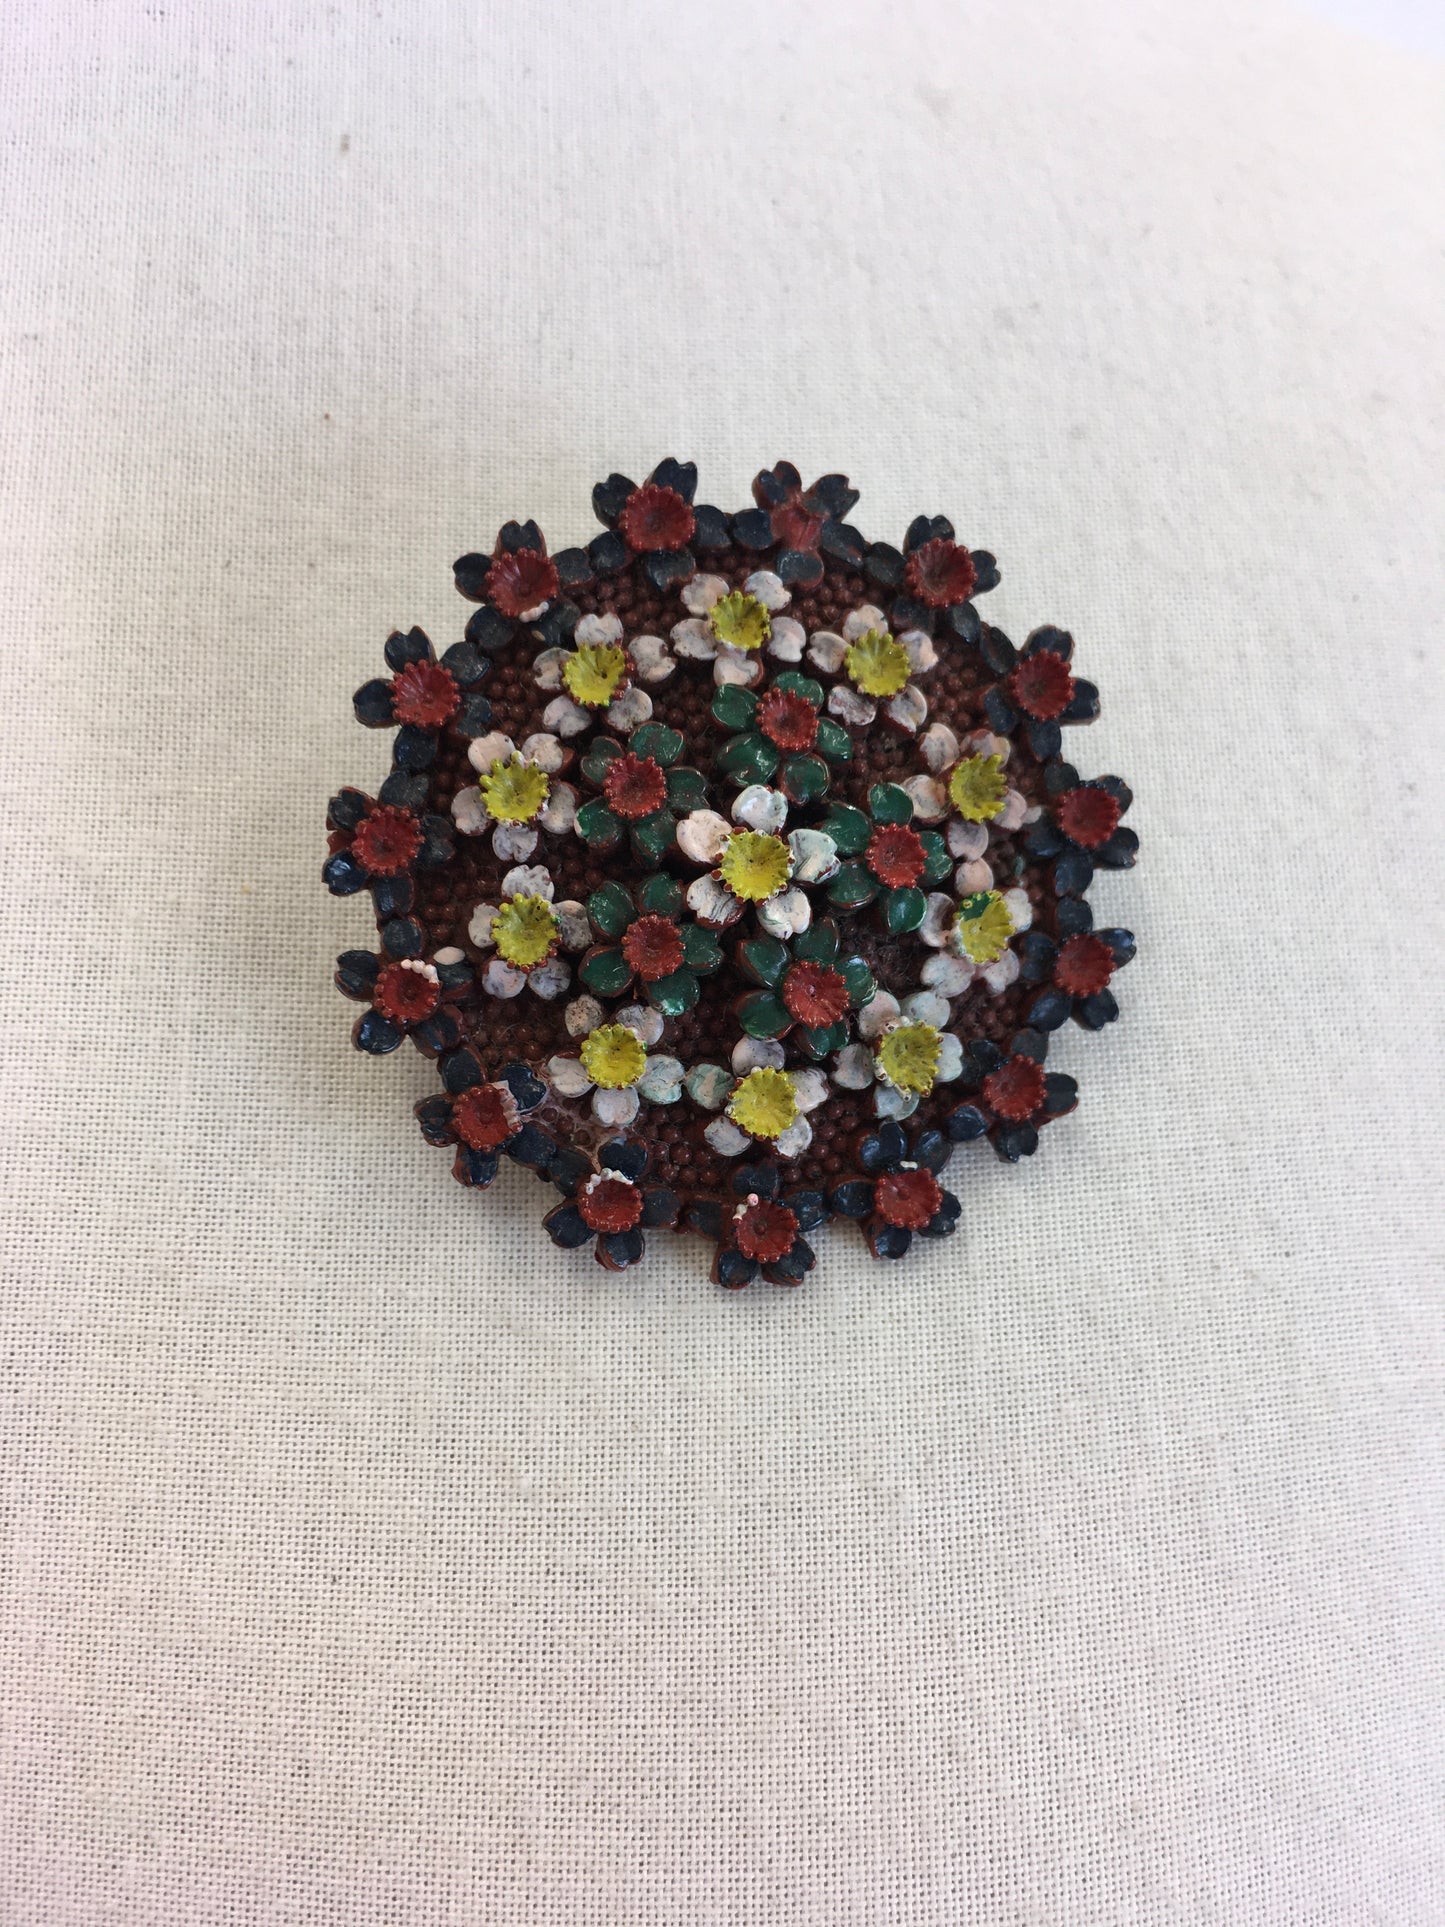 Original 1940's Exquisite Early Plastic Circular Brooch - In A Rainbow Floral Pallet